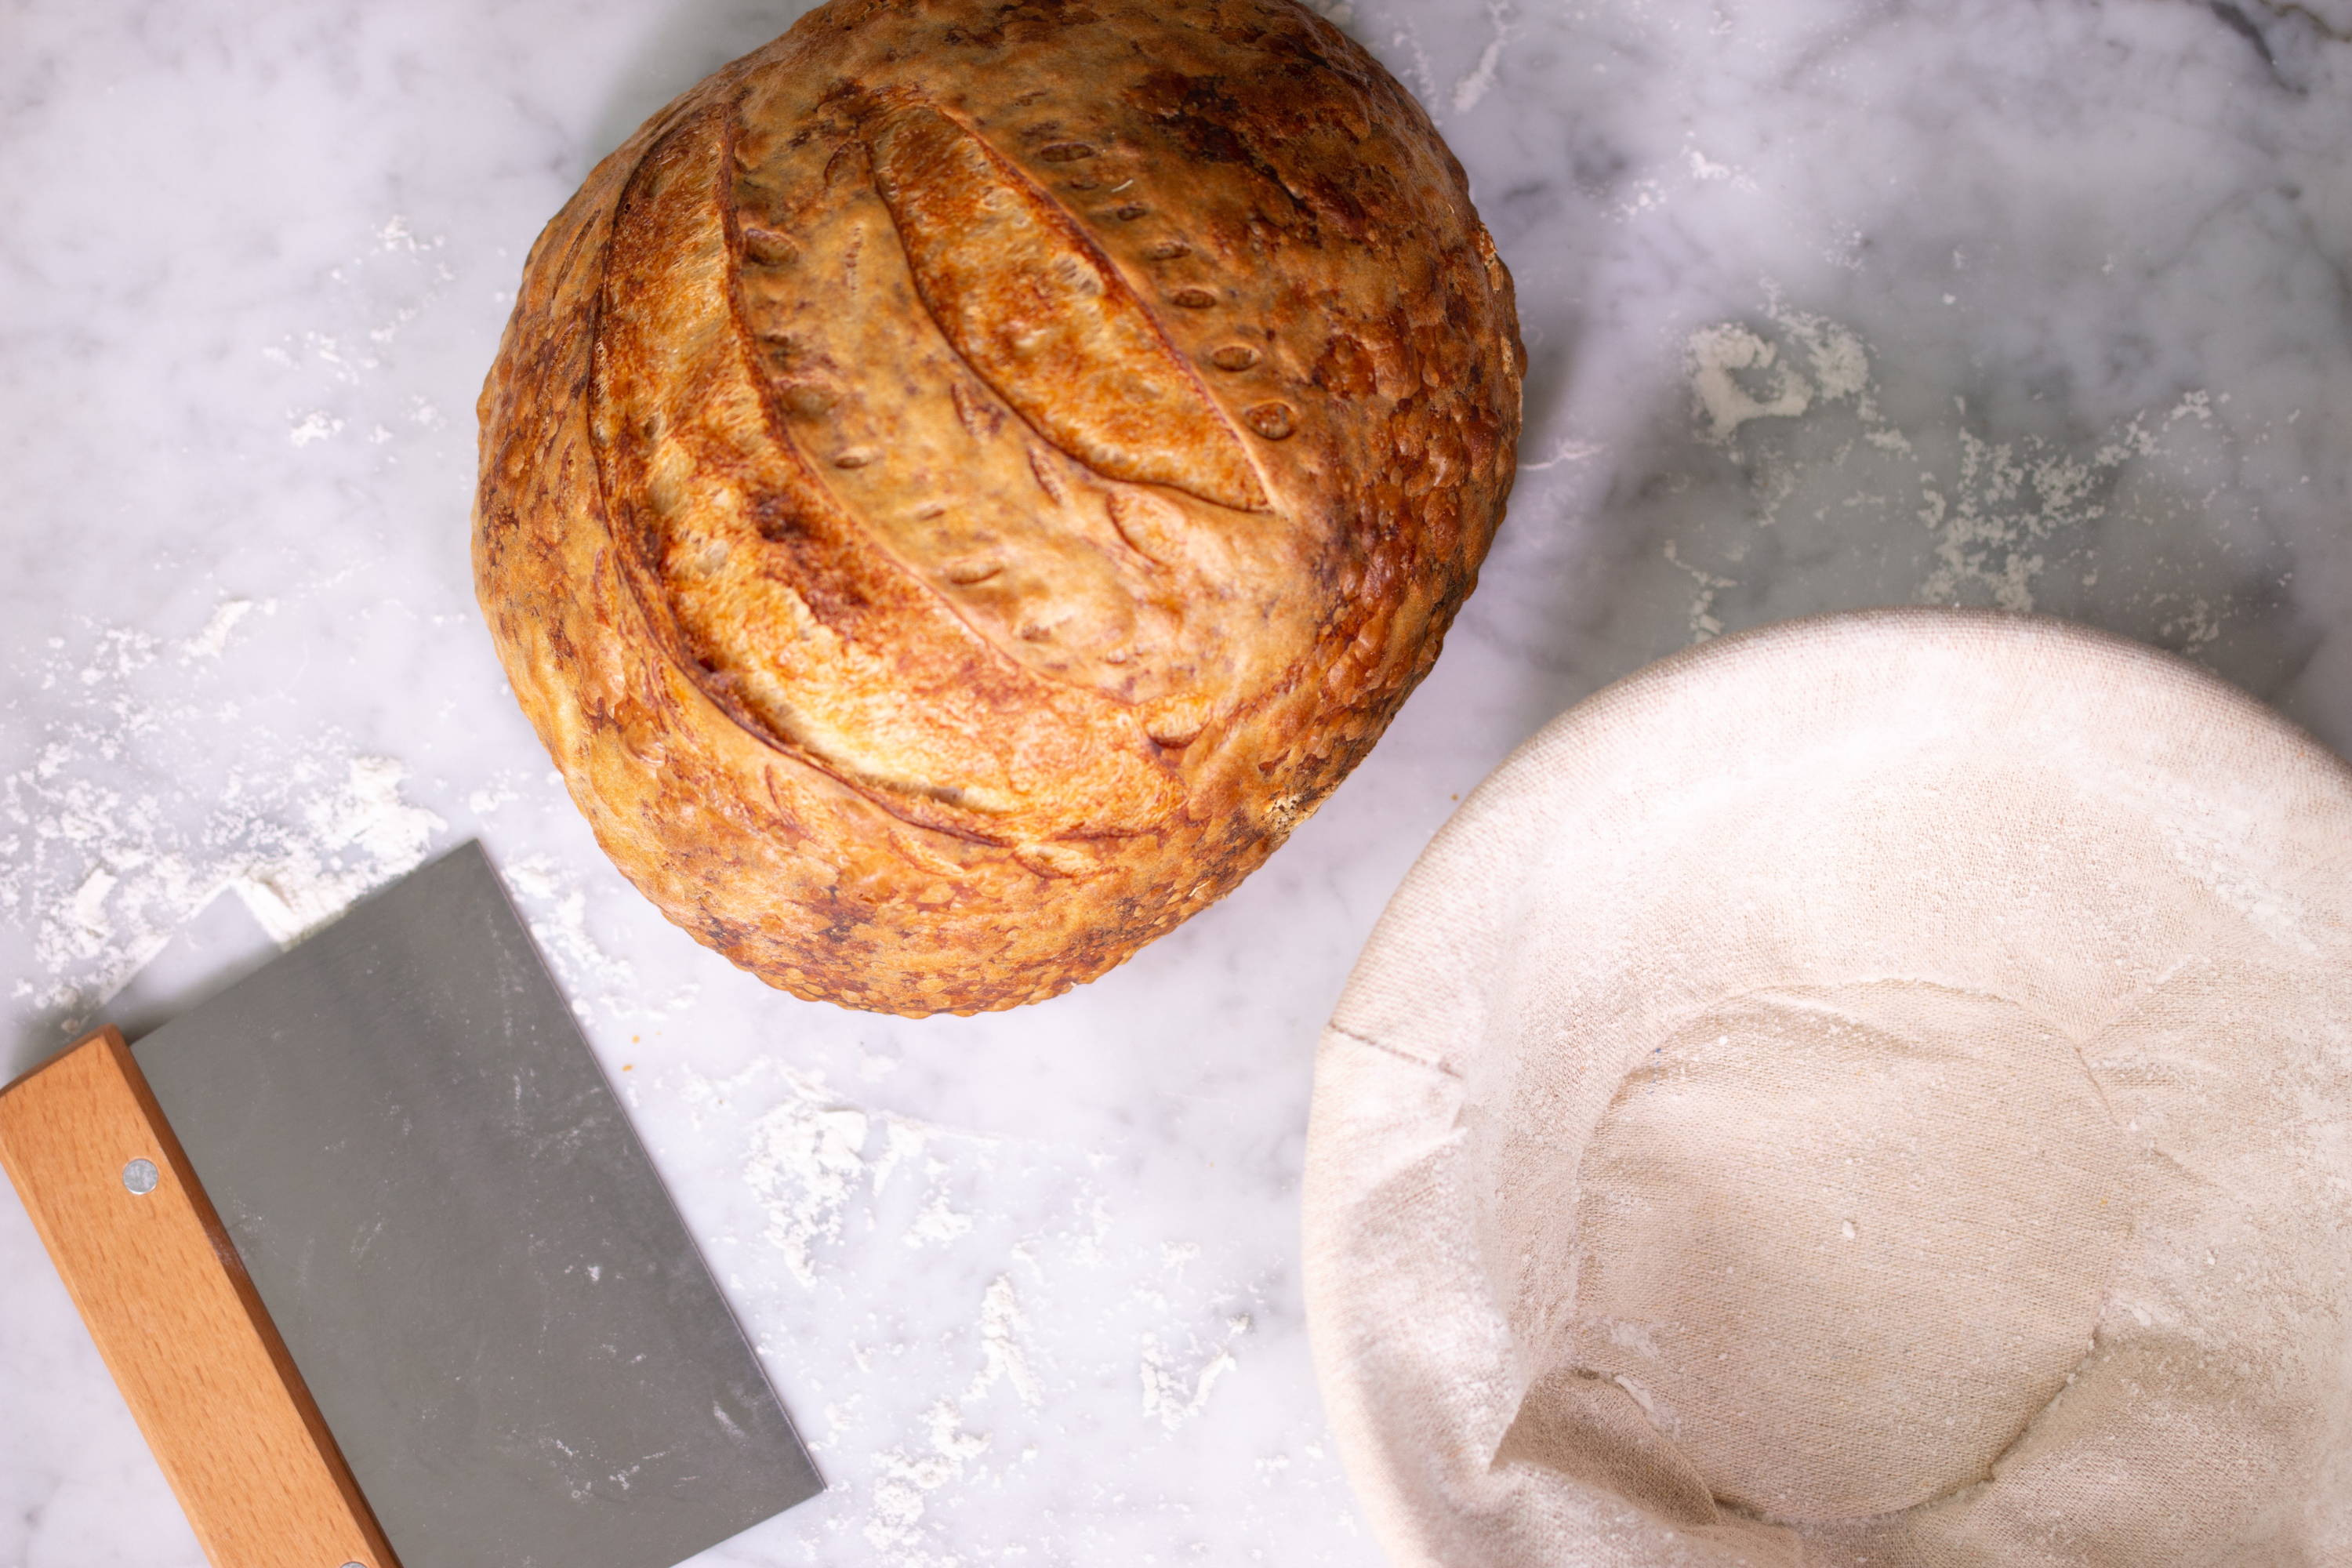 How to Make Sourdough Bread  A Beginner's Guide - The Farmstyle